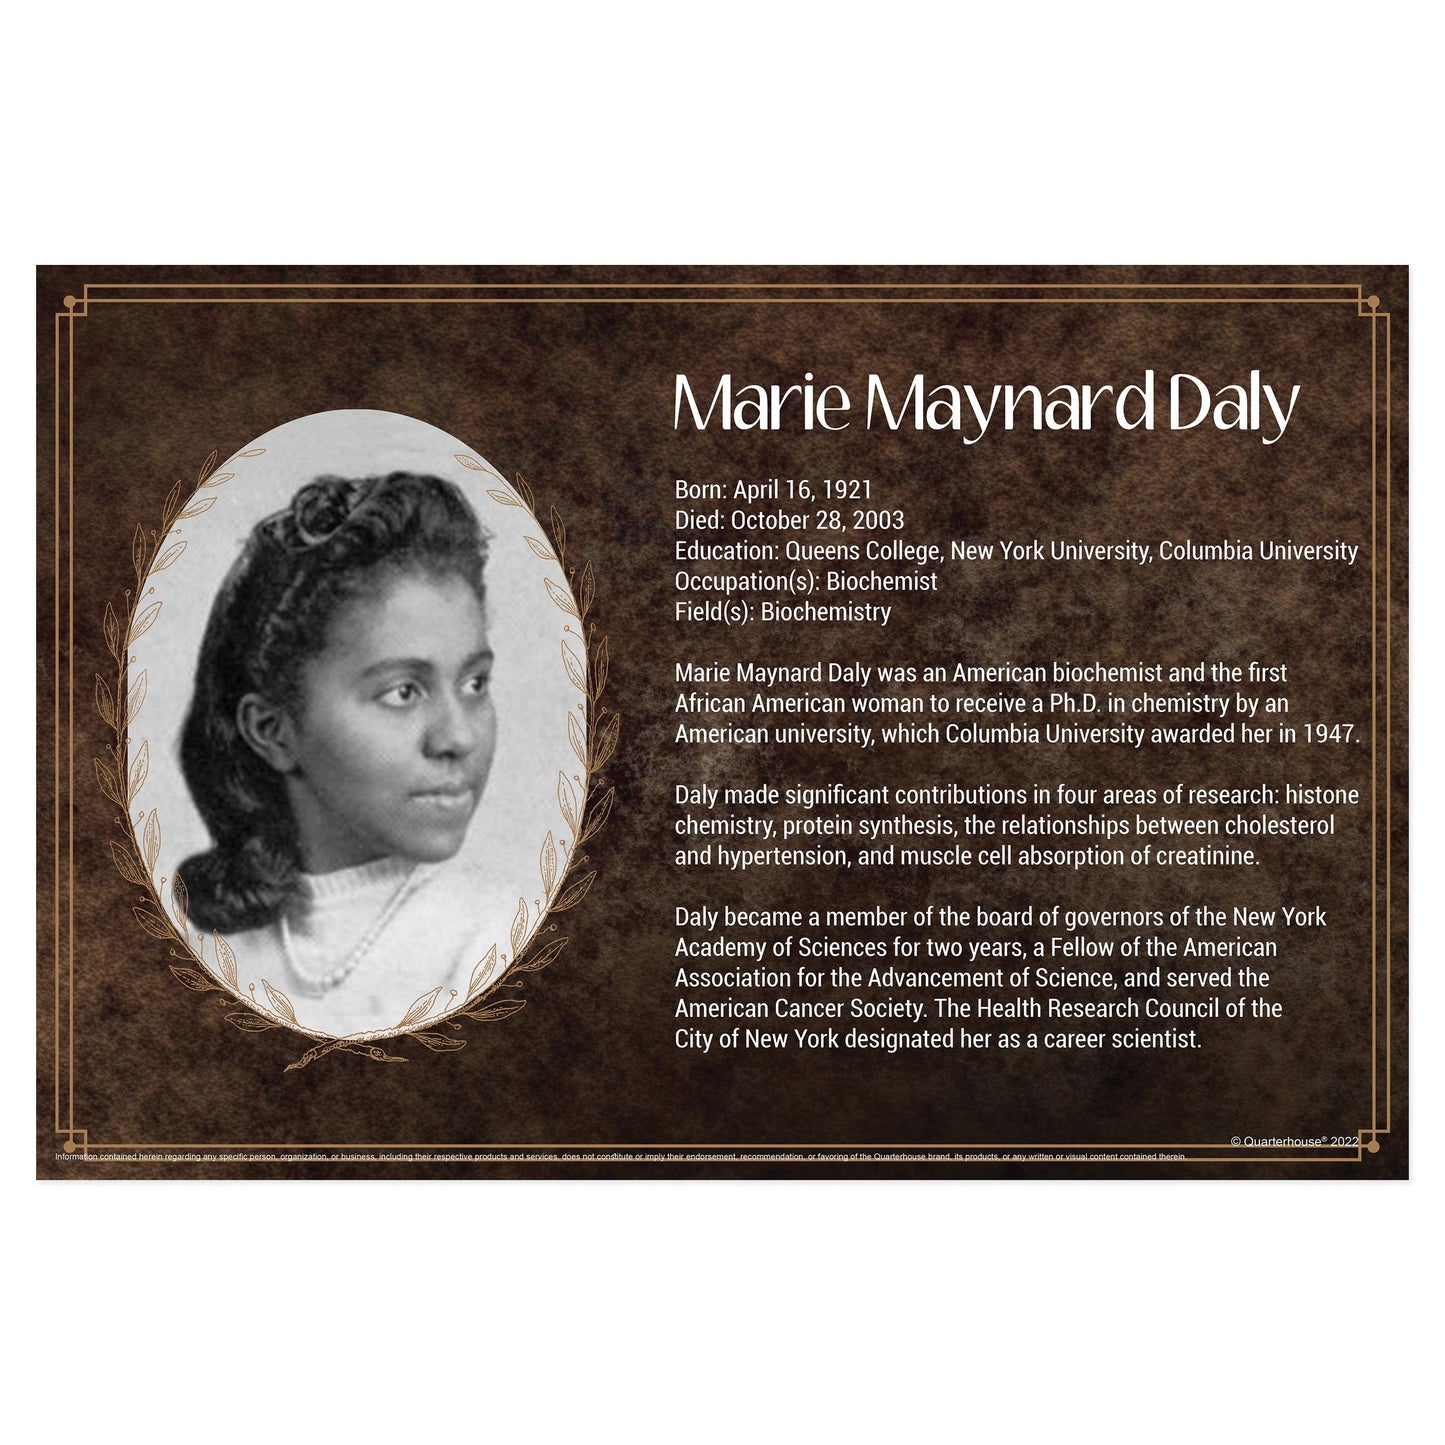 Quarterhouse Black Scientists - Marie Maynard Daly Biographical Poster, Science Classroom Materials for Teachers